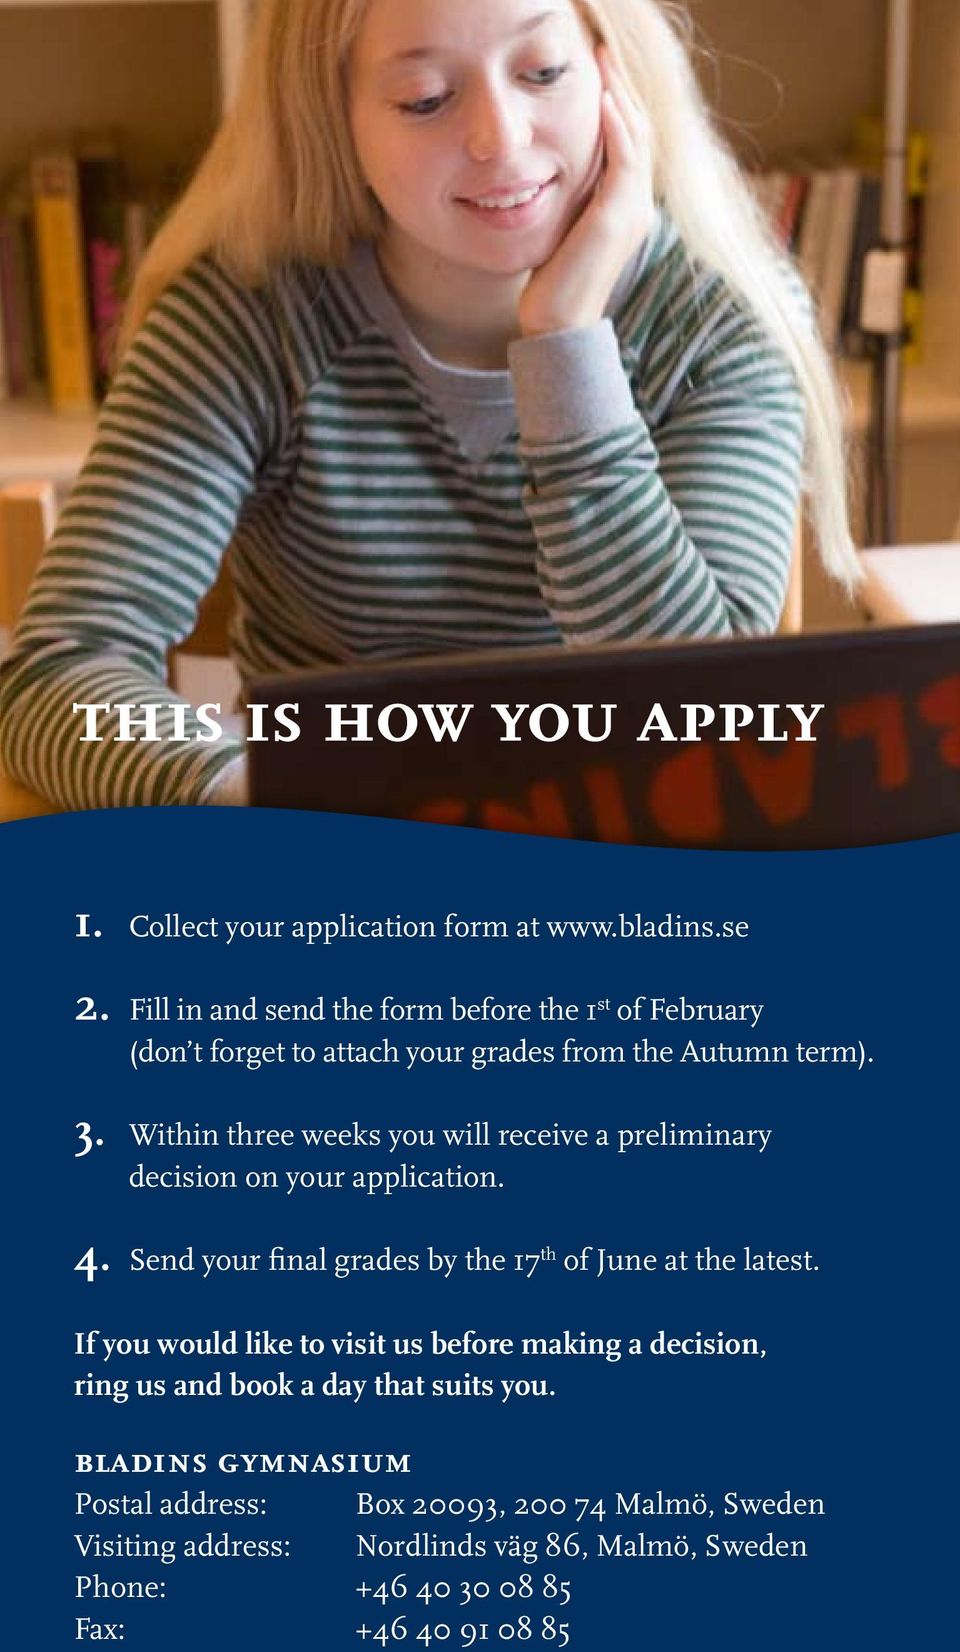 Within three weeks you will receive a preliminary decision on your application. 4. Send your final grades by the 17 th of June at the latest.